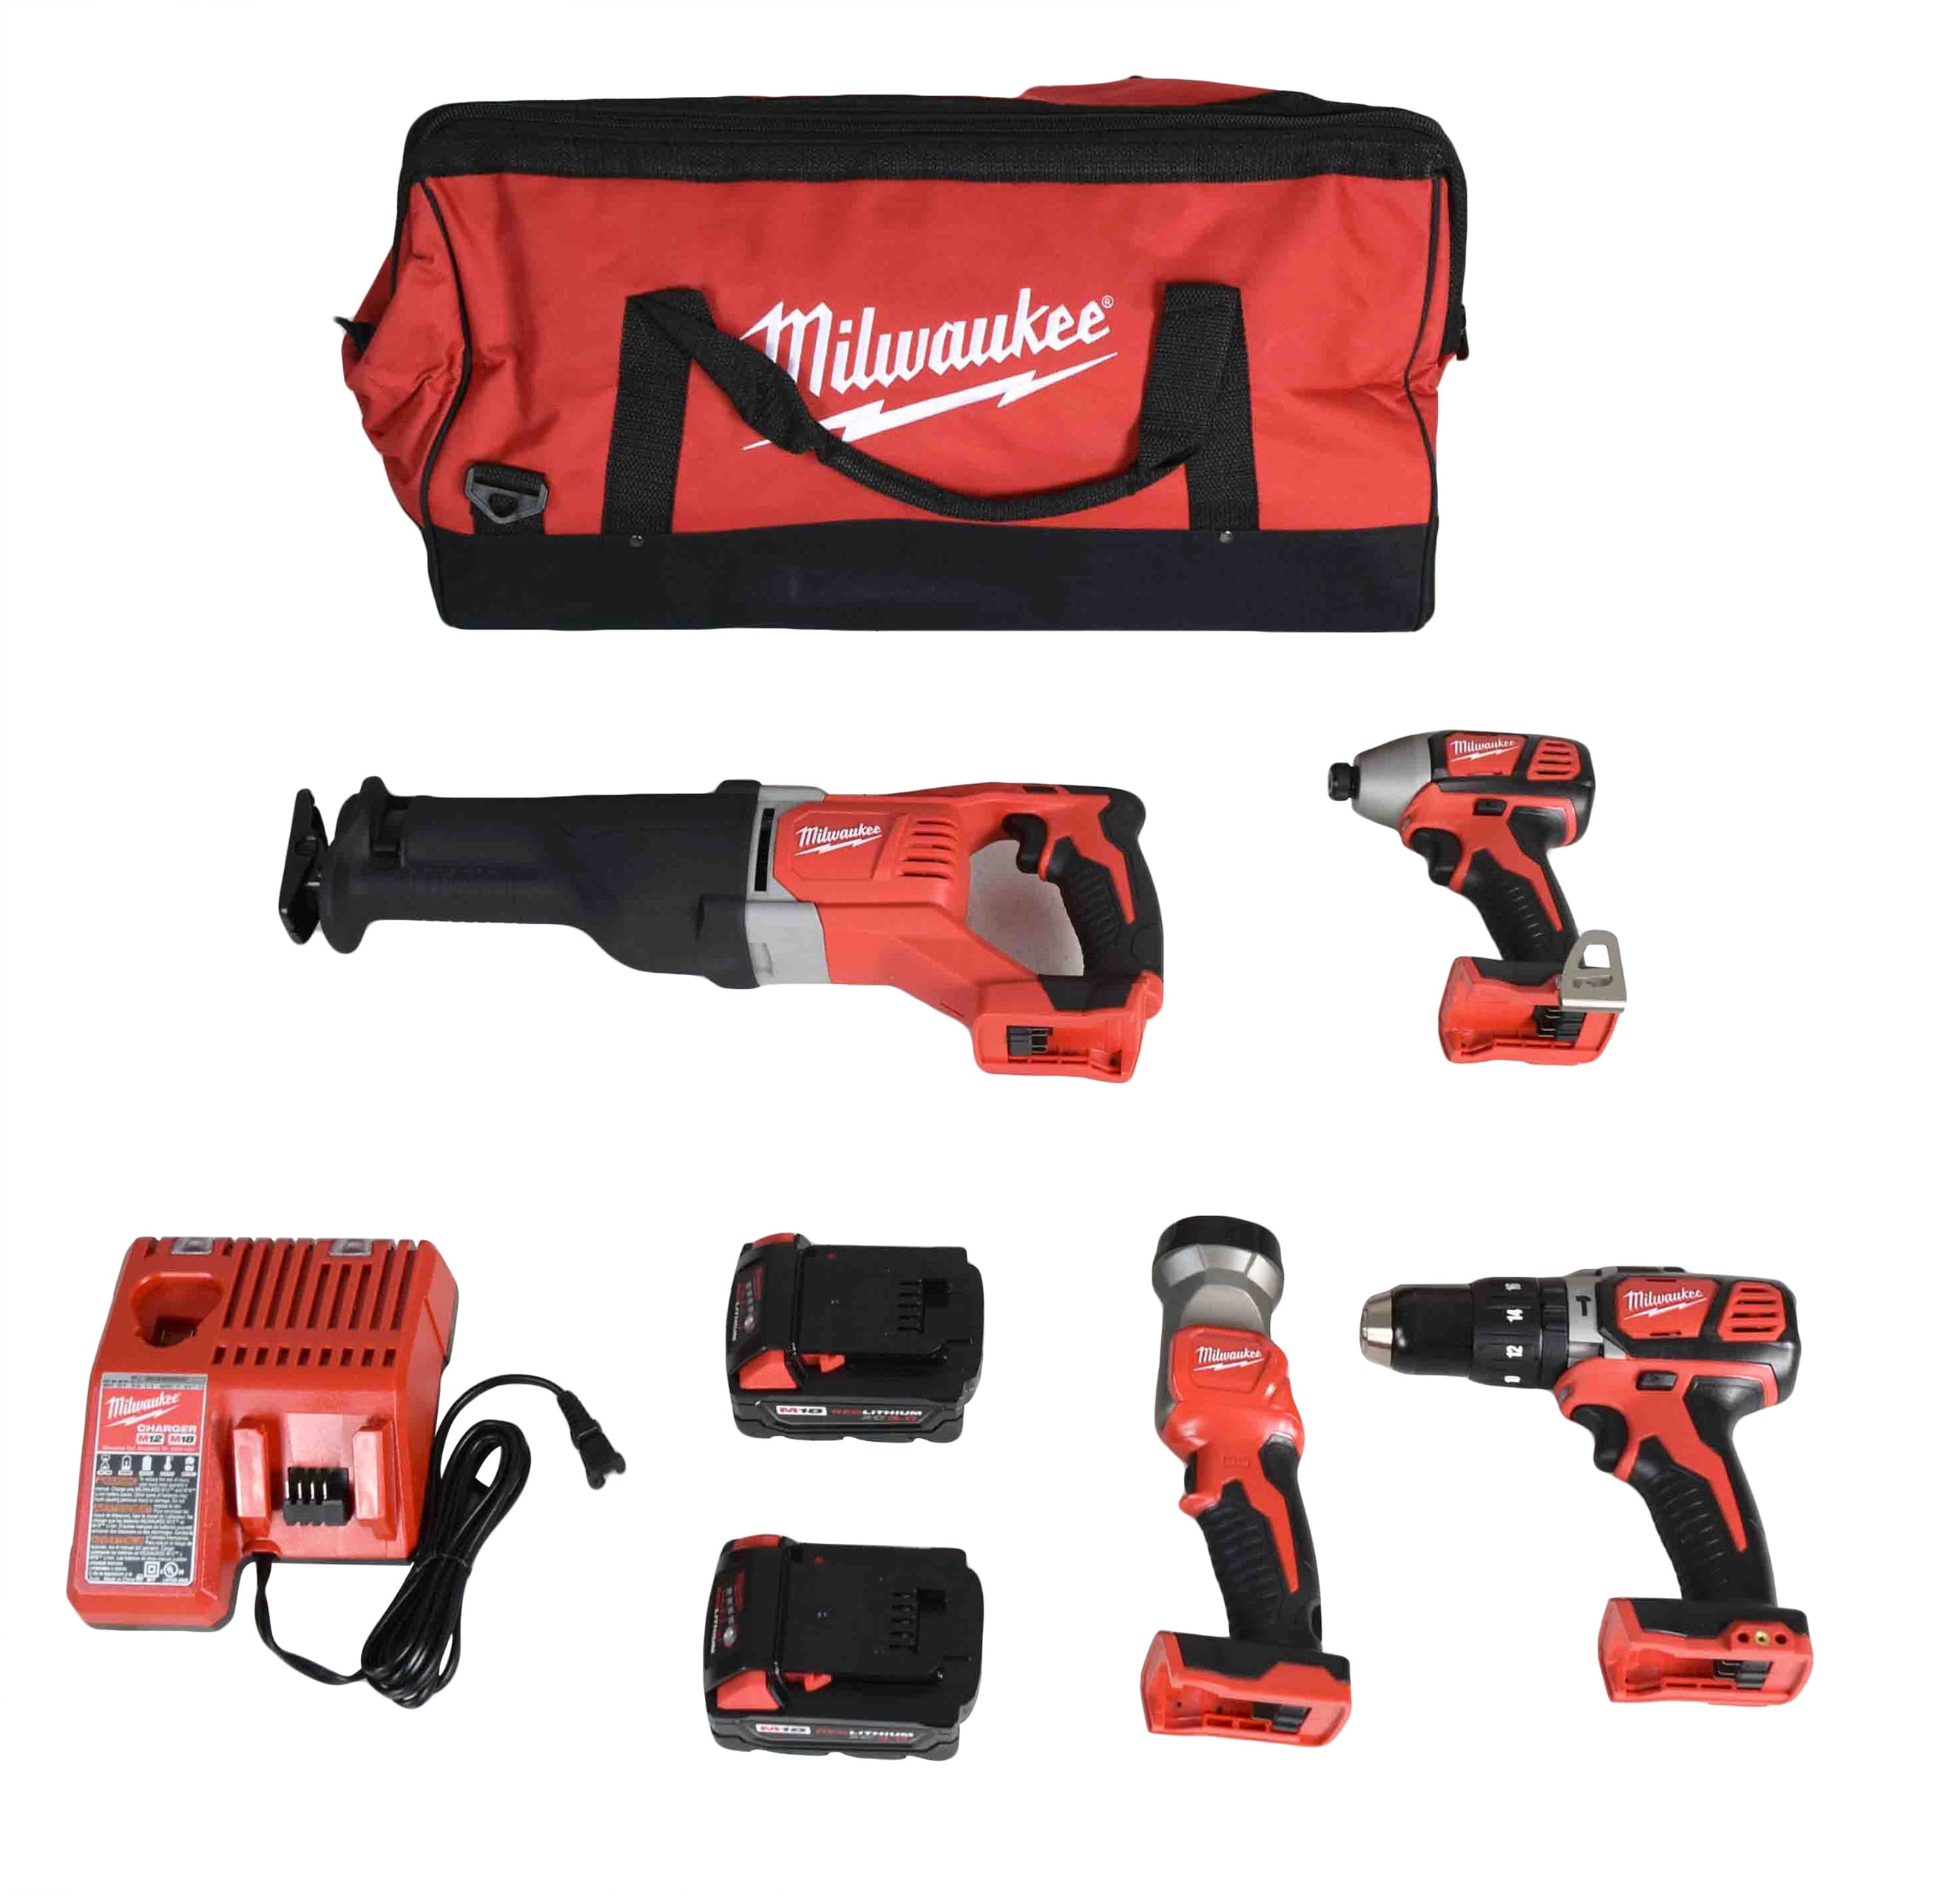 Milwaukee 2606-21P M18 18V 1/2 inch Cordless Drill/Driver Kit for sale online 